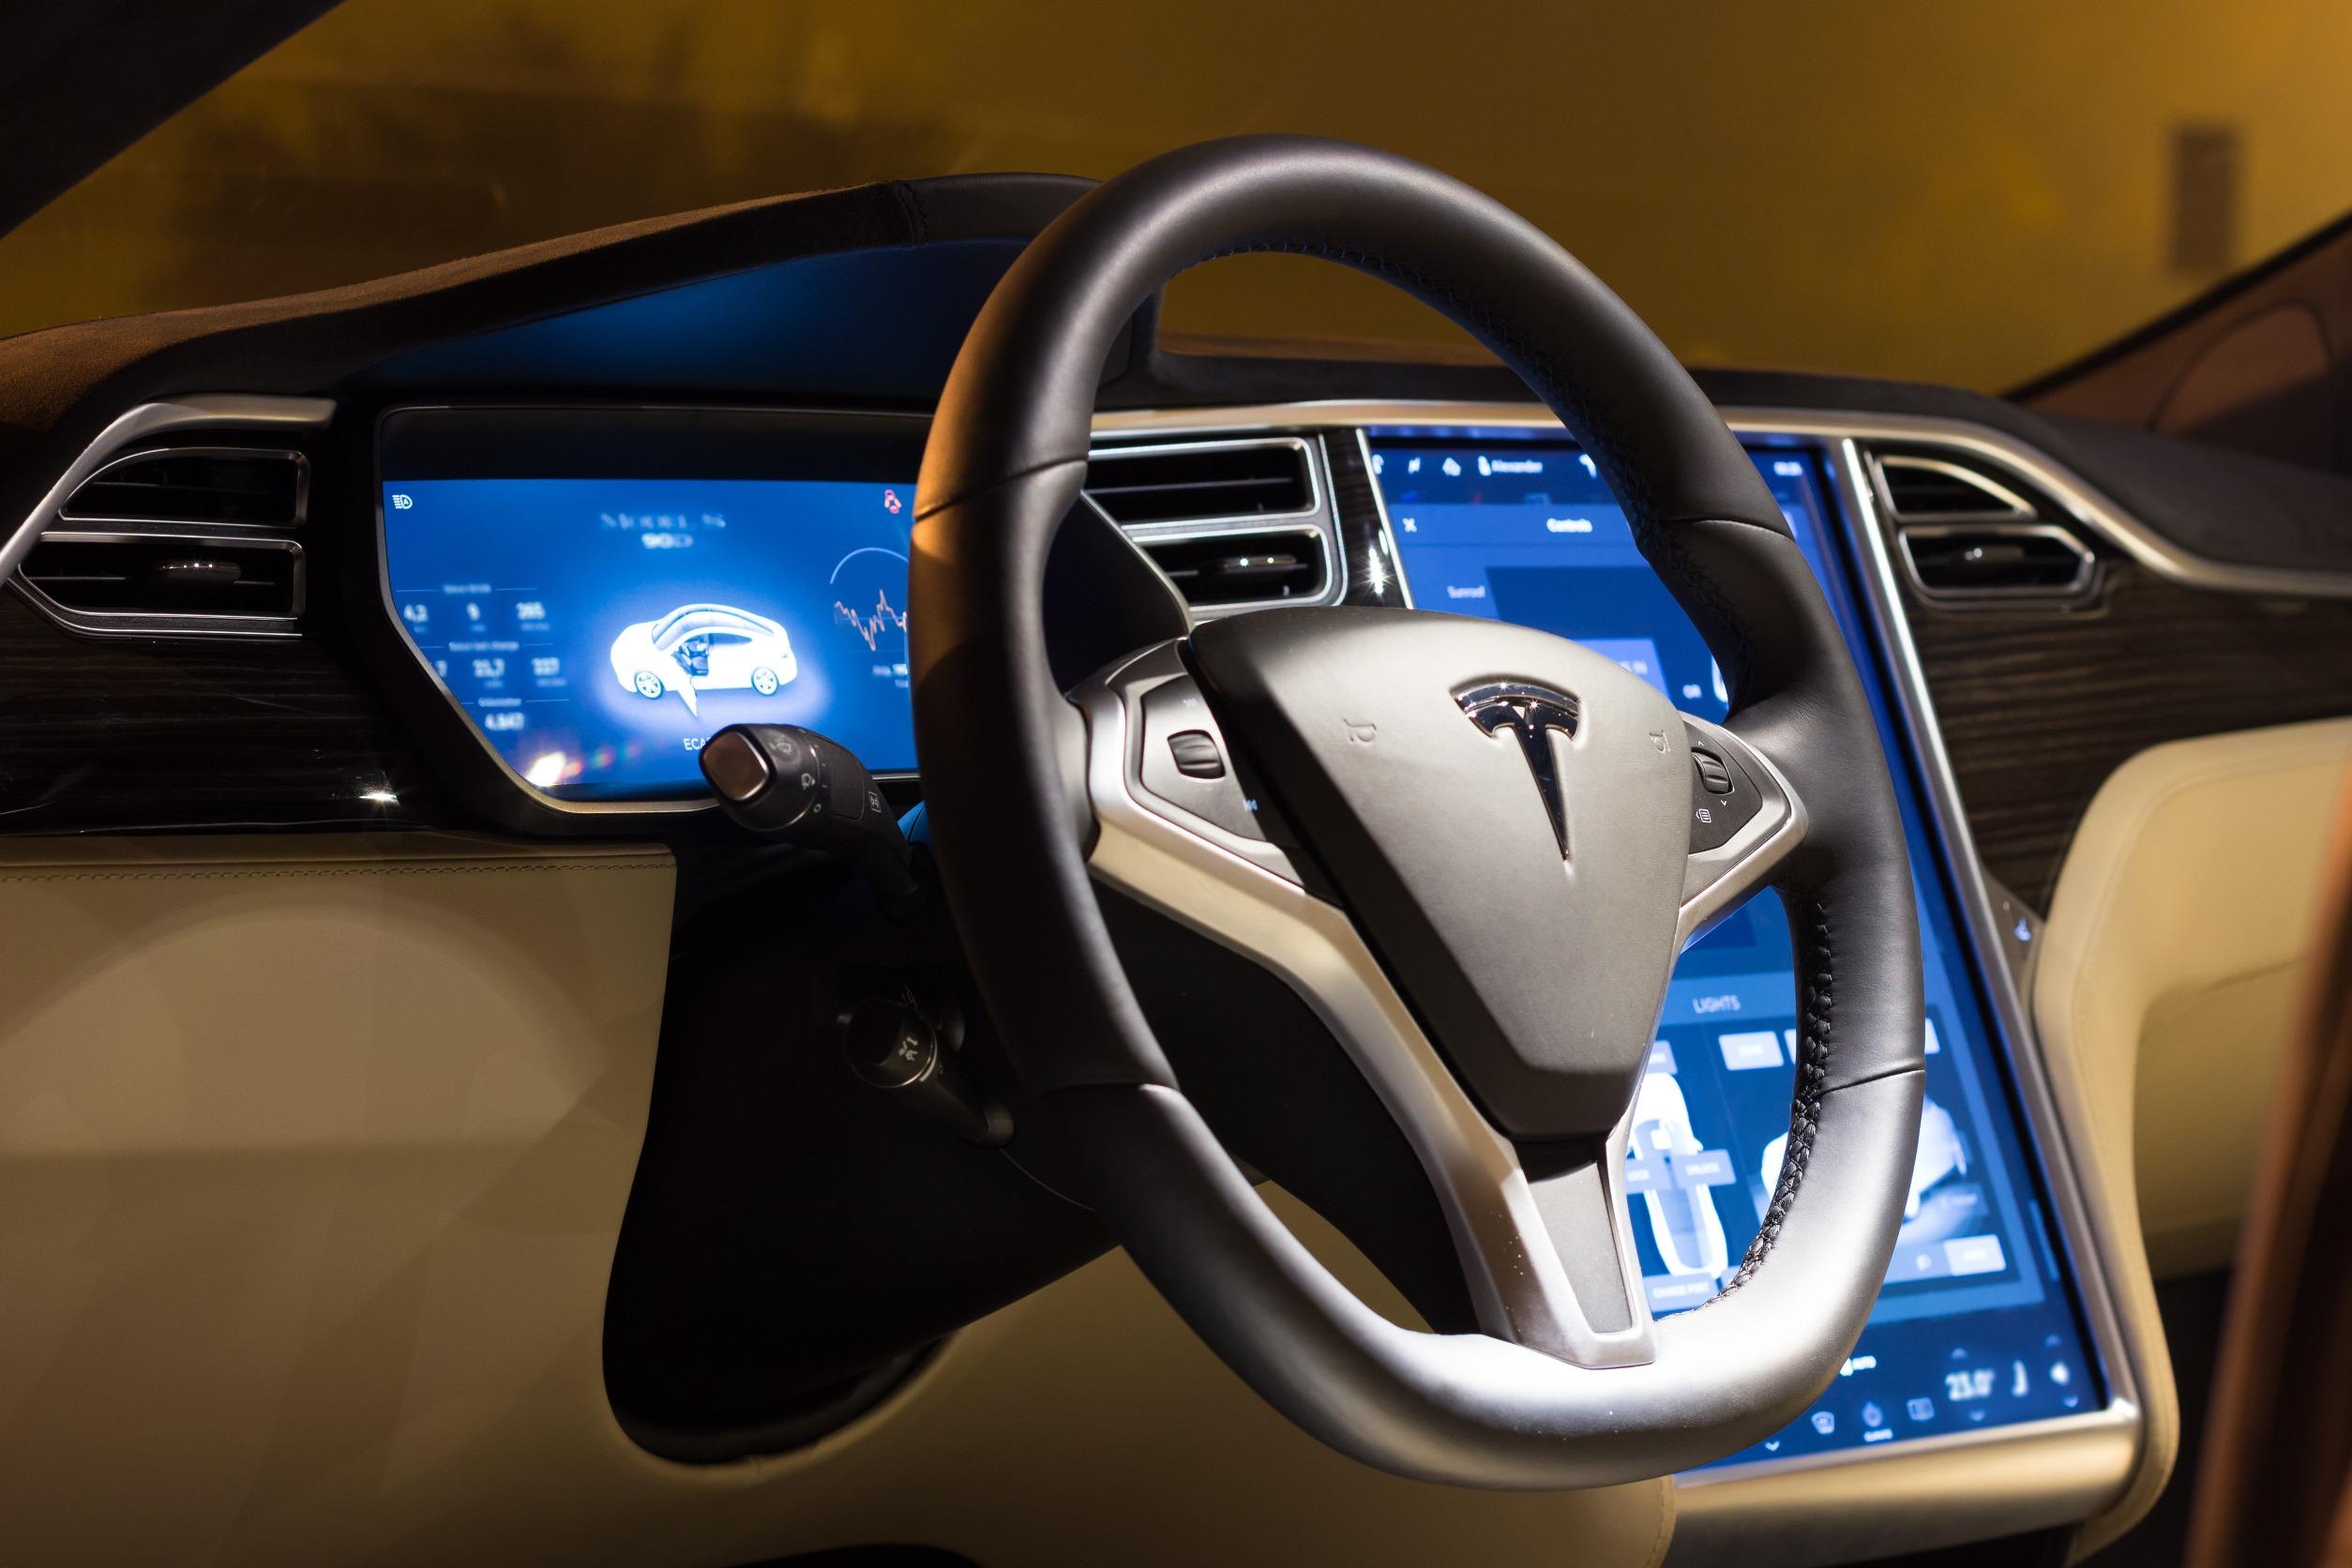 Tesla Autopilot and FSD to other automakers: Elon Musk's announcement